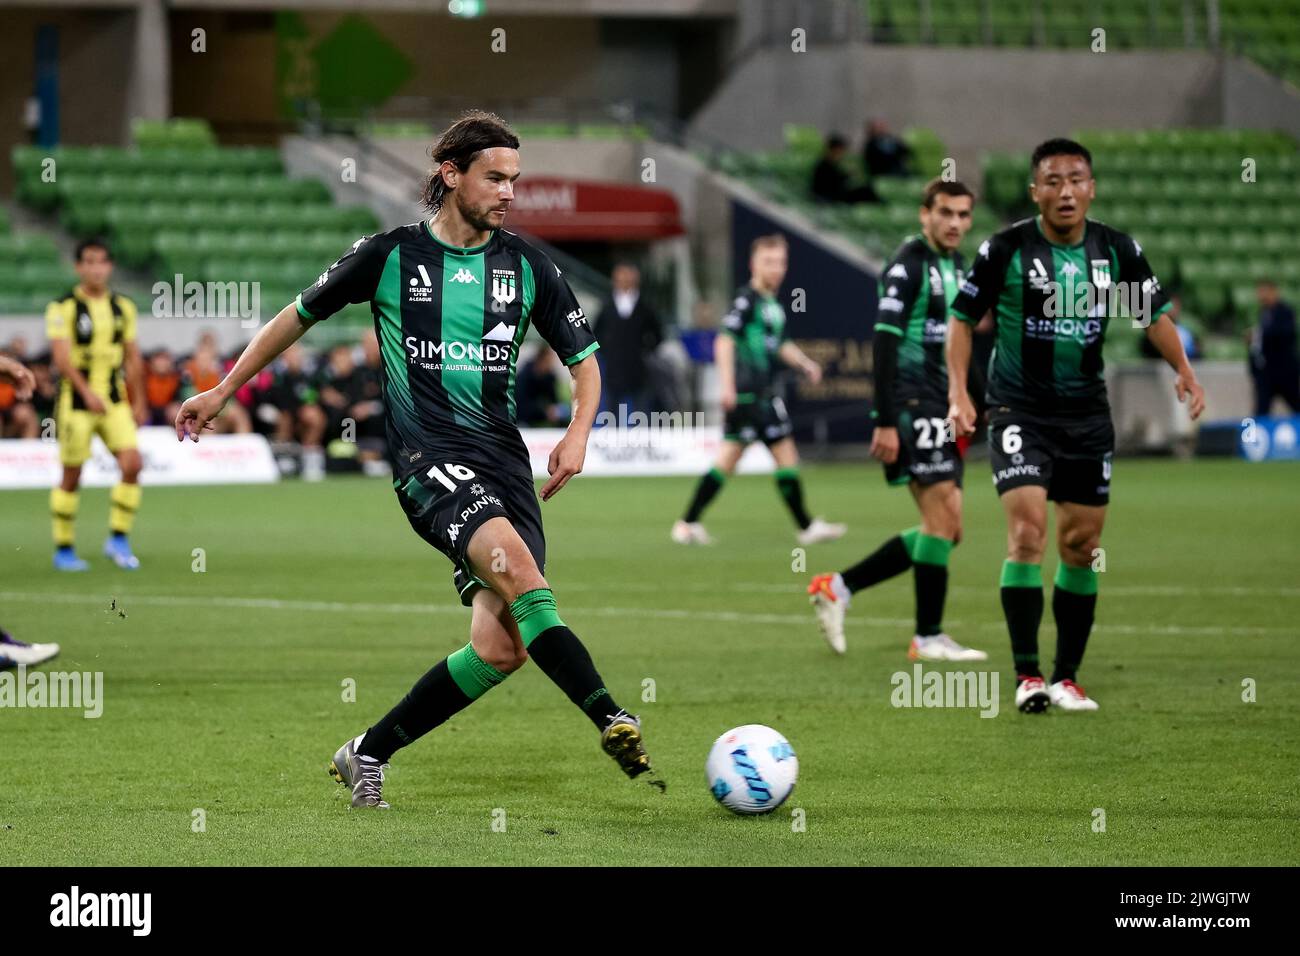 MELBOURNE, AUSTRALIA - MAY 14: Rene Krhin of Western United controls the ball during the A-League Elimination Final soccer match between Western United and Wellington Phoenix at AAMI Park on May 14, 2022 in Melbourne, Australia. Credit: Dave Hewison Stock Photo